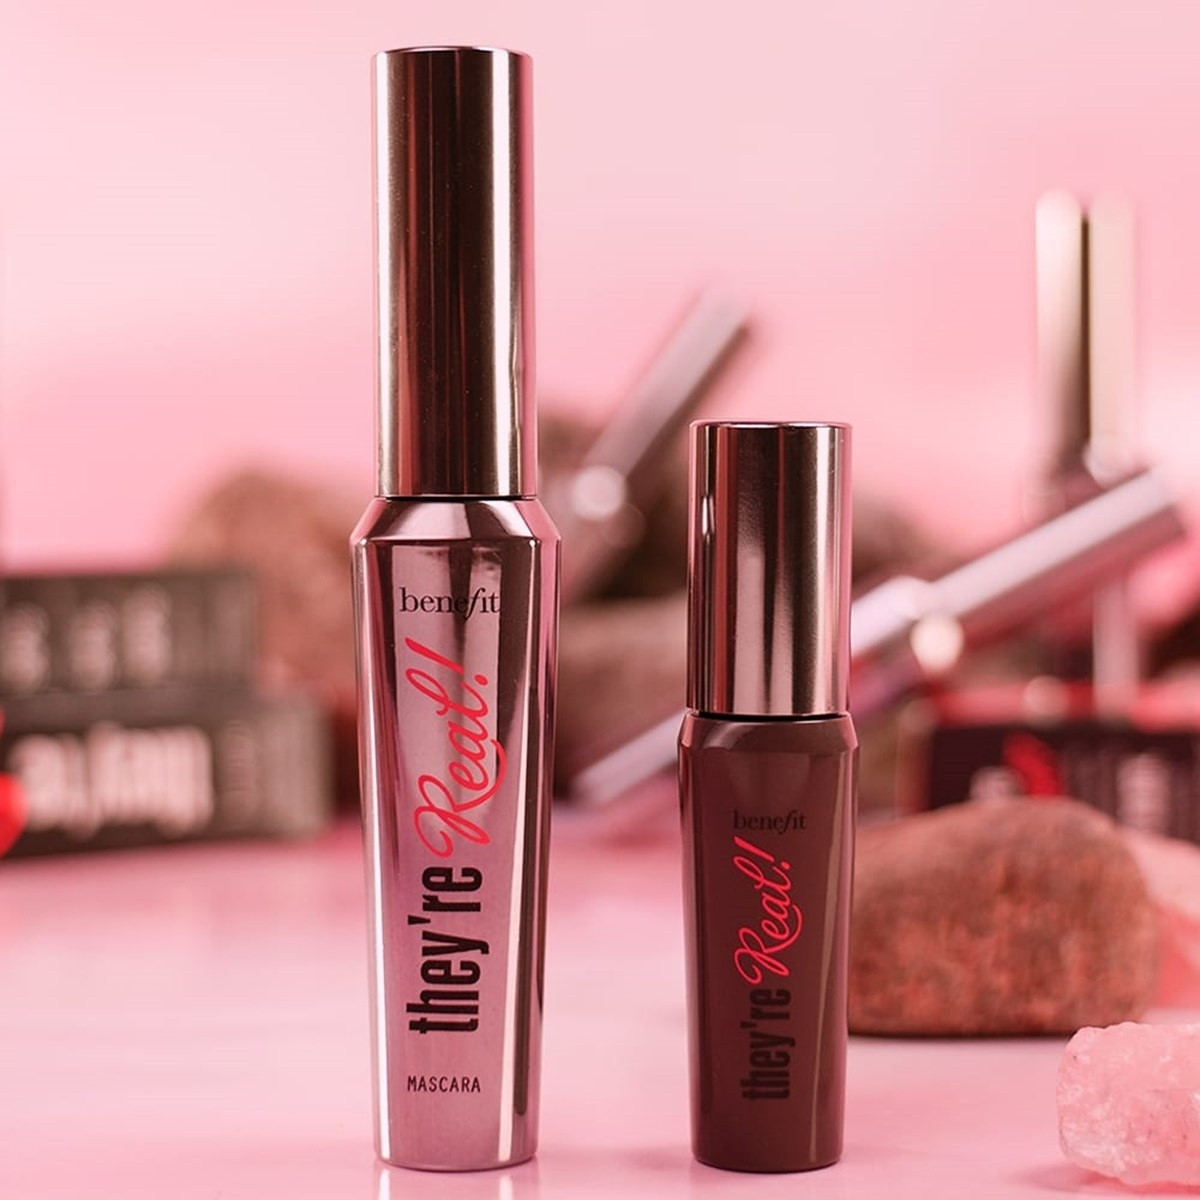 Two Benefit &quot;They&#x27;re Real!&quot; mascaras on a pink background